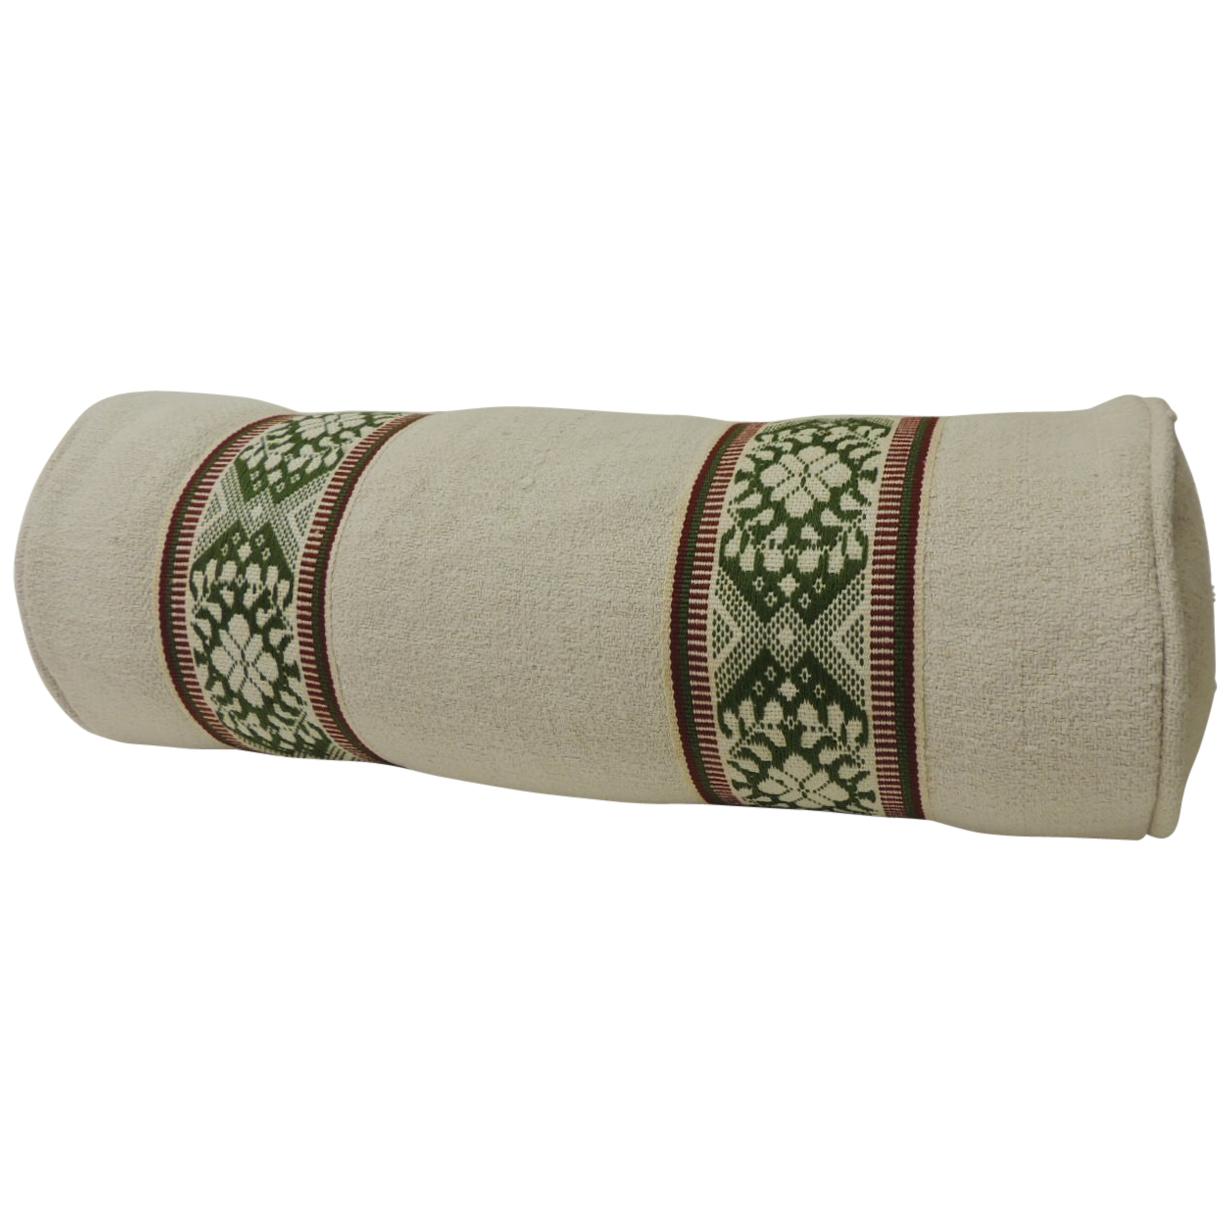 Vintage Green and Natural Woven Trim Decorative Round Roll Bolster Pillow